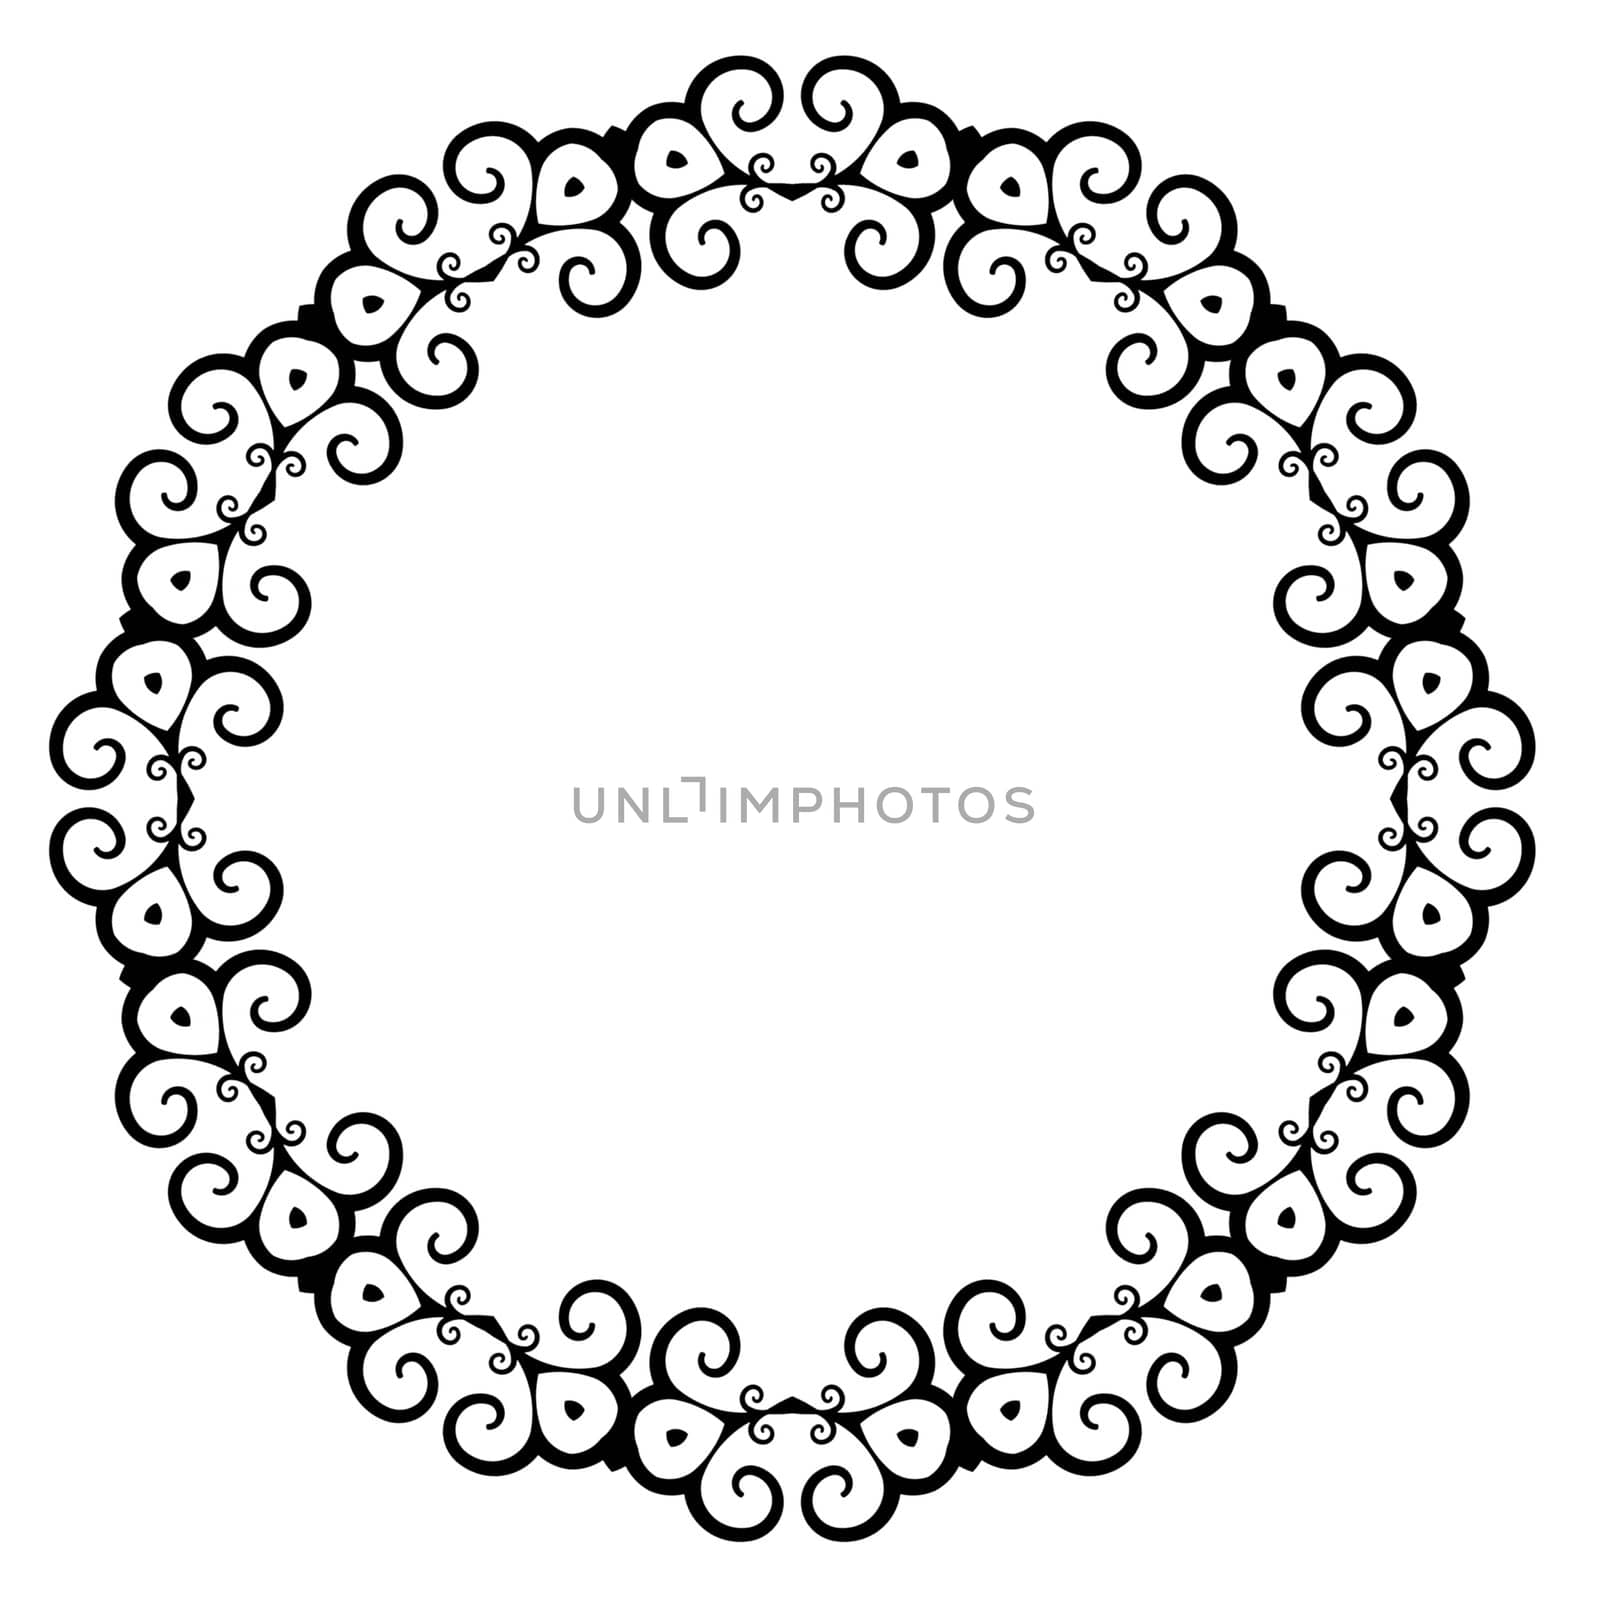 Illustrated black and white round frame on a white background